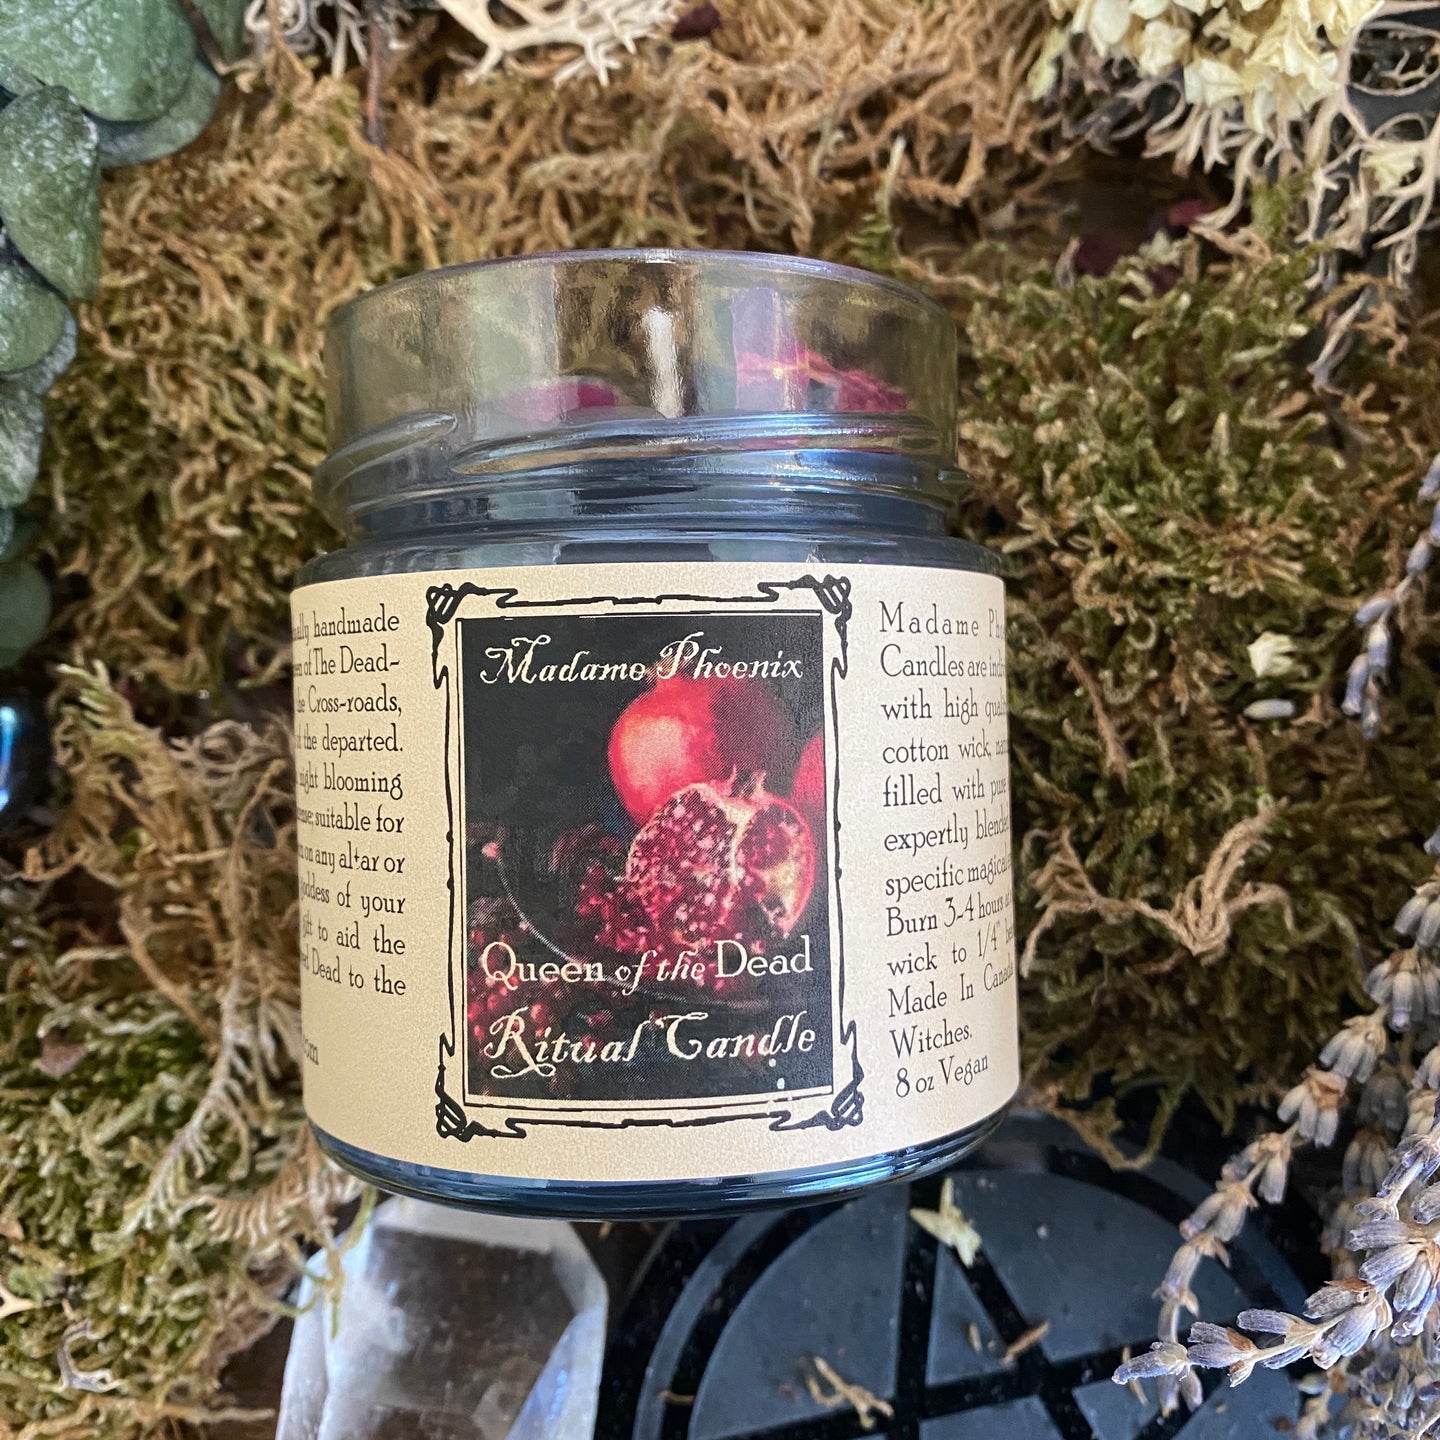 Queen of the Dead Samhain Altar Candle